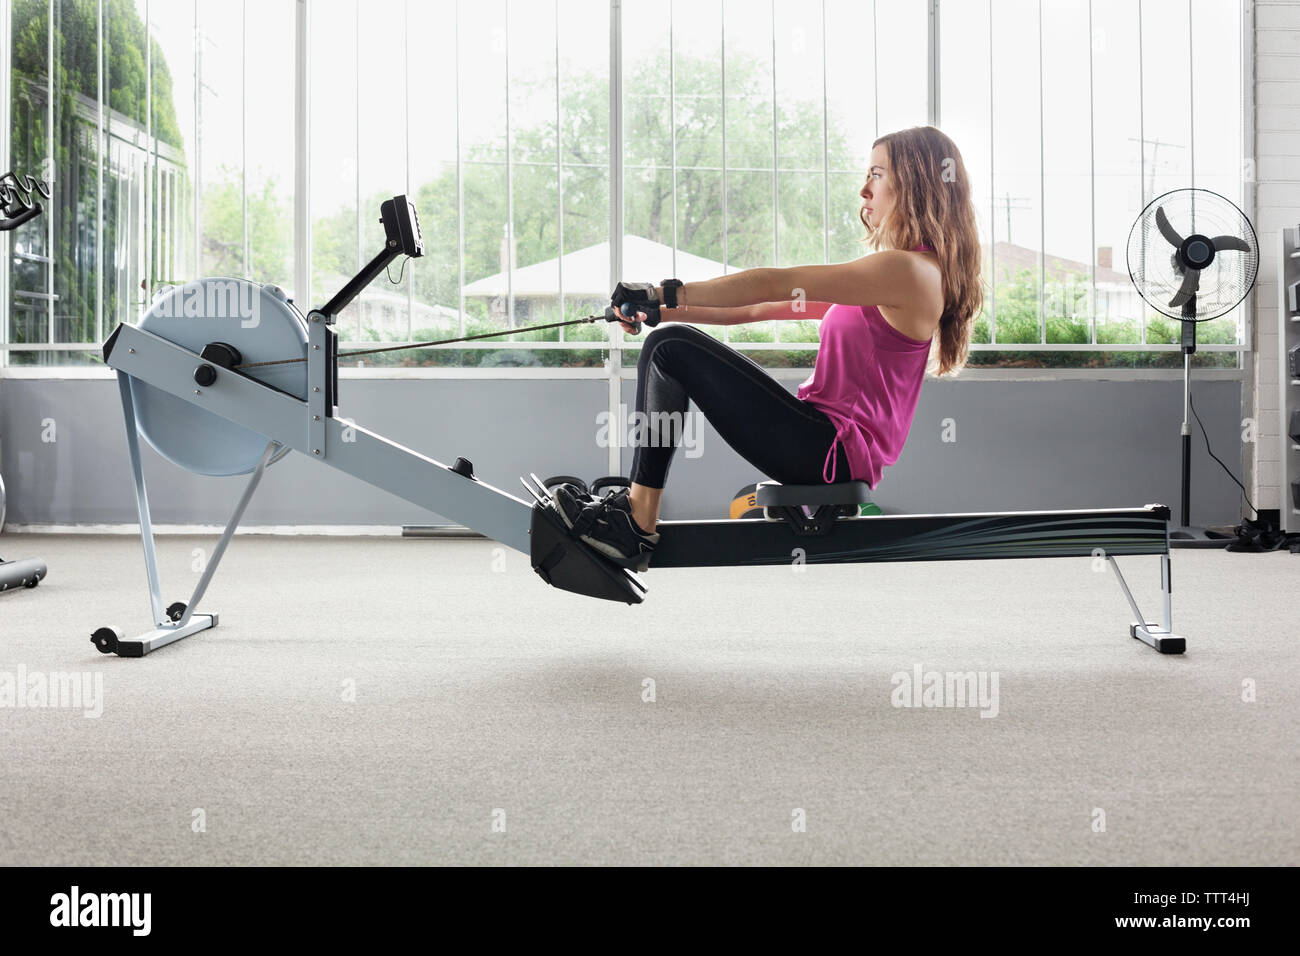 Woman exercising on rowing machine in gym Stock Photo